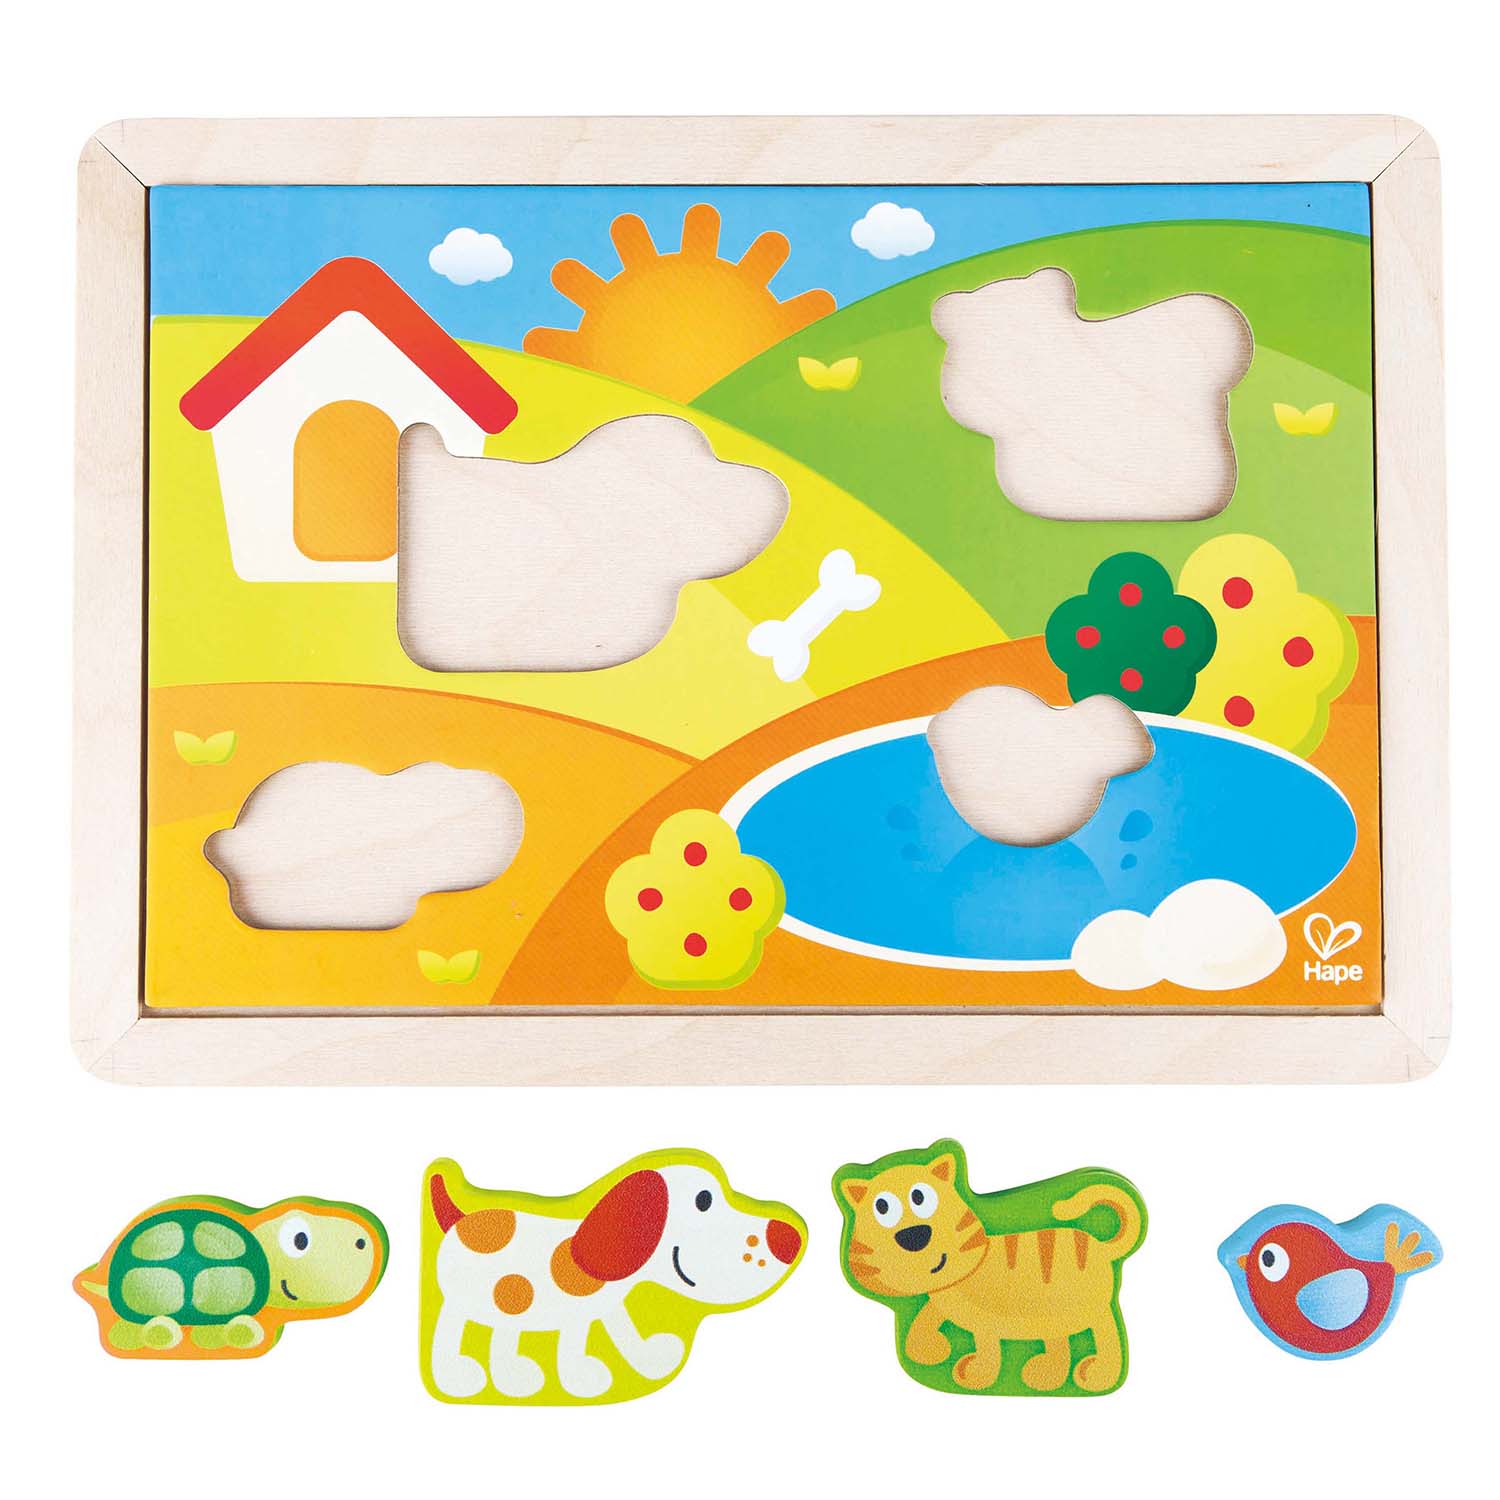 Hape: Sunny Valley Puzzle 3 In 1